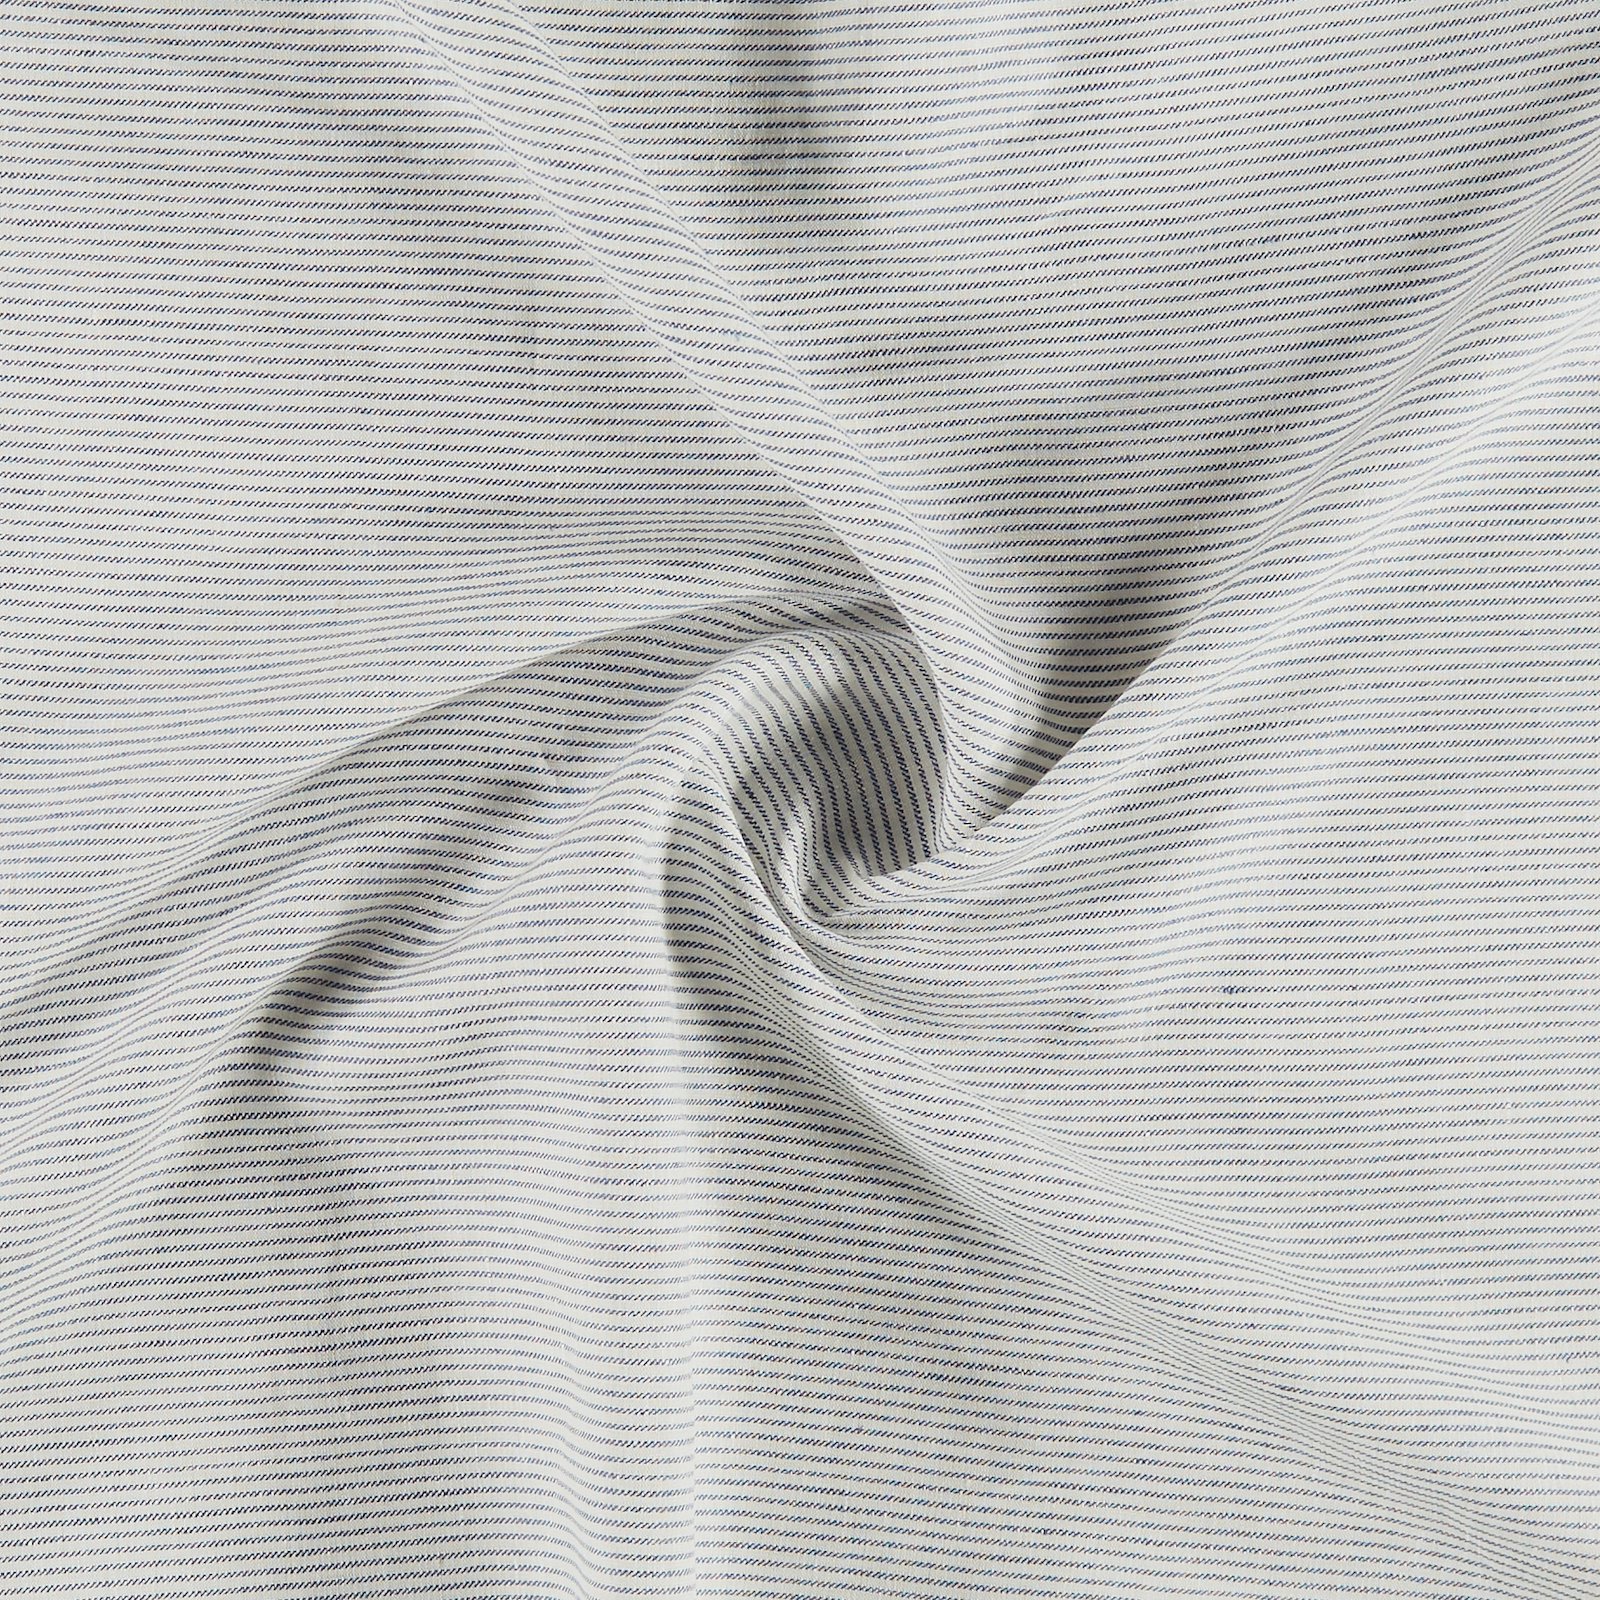 Linen YD off white with thin blue stripe 511028_pack